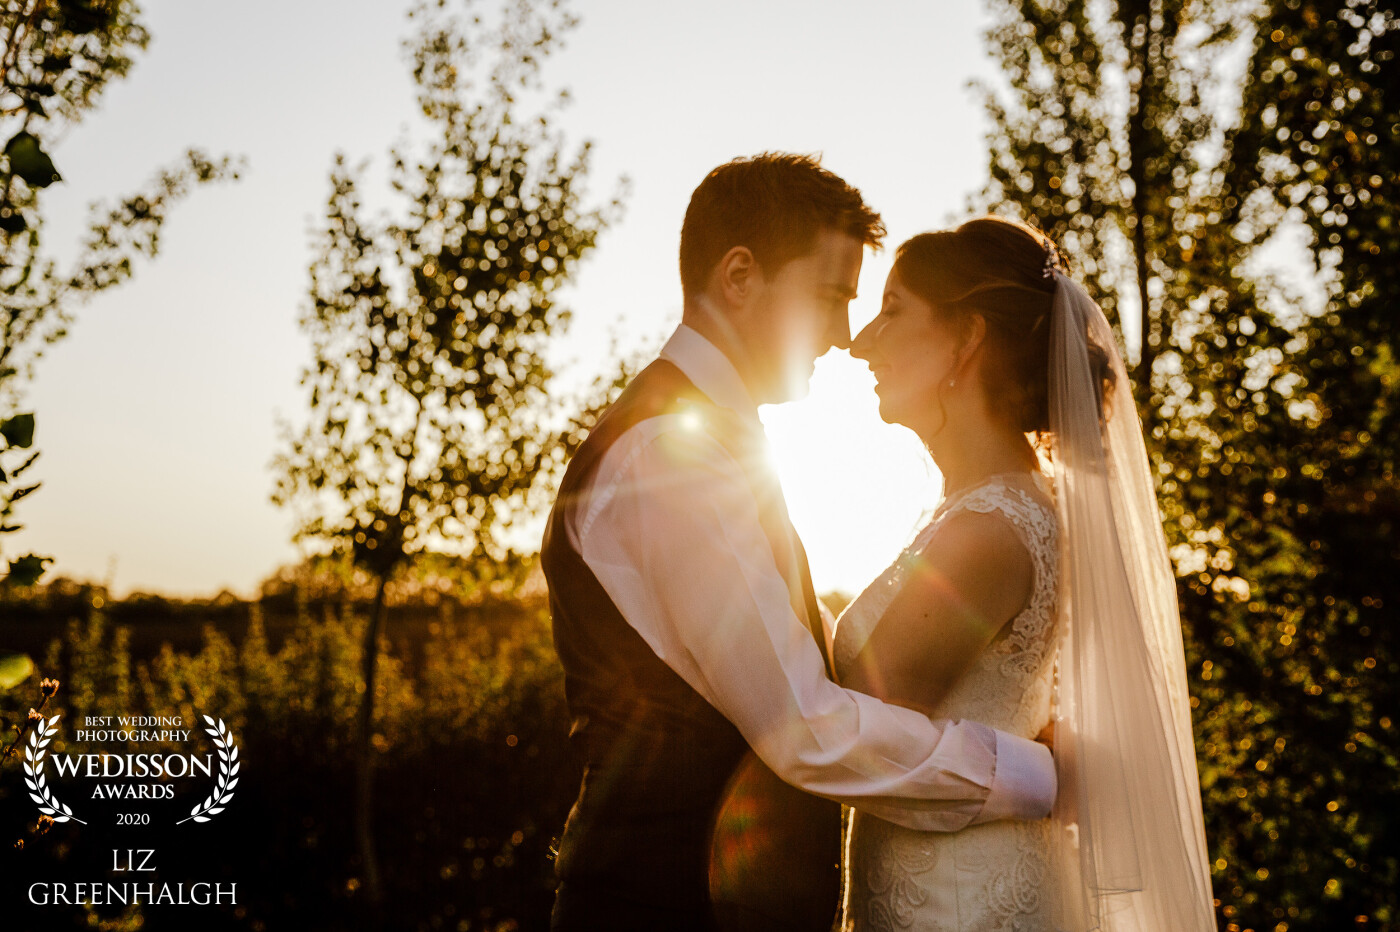 The sun shone down for Katy and Josh at their late summer wedding at South Farm. Enjoying a little time together we wandered the meadows to seek out the setting sun.